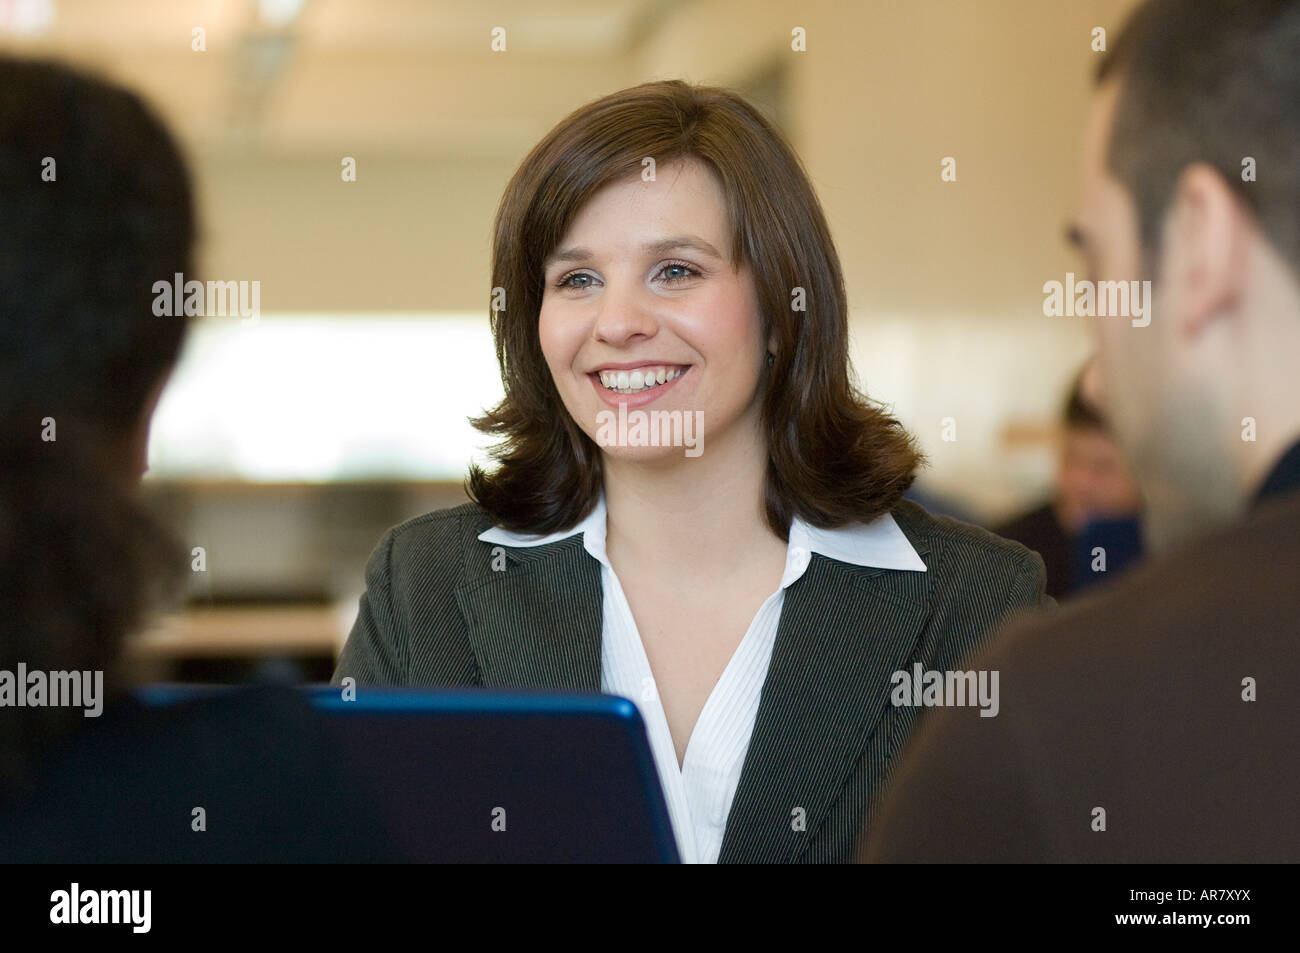 Sales consultant presenting to clients. Stock Photo